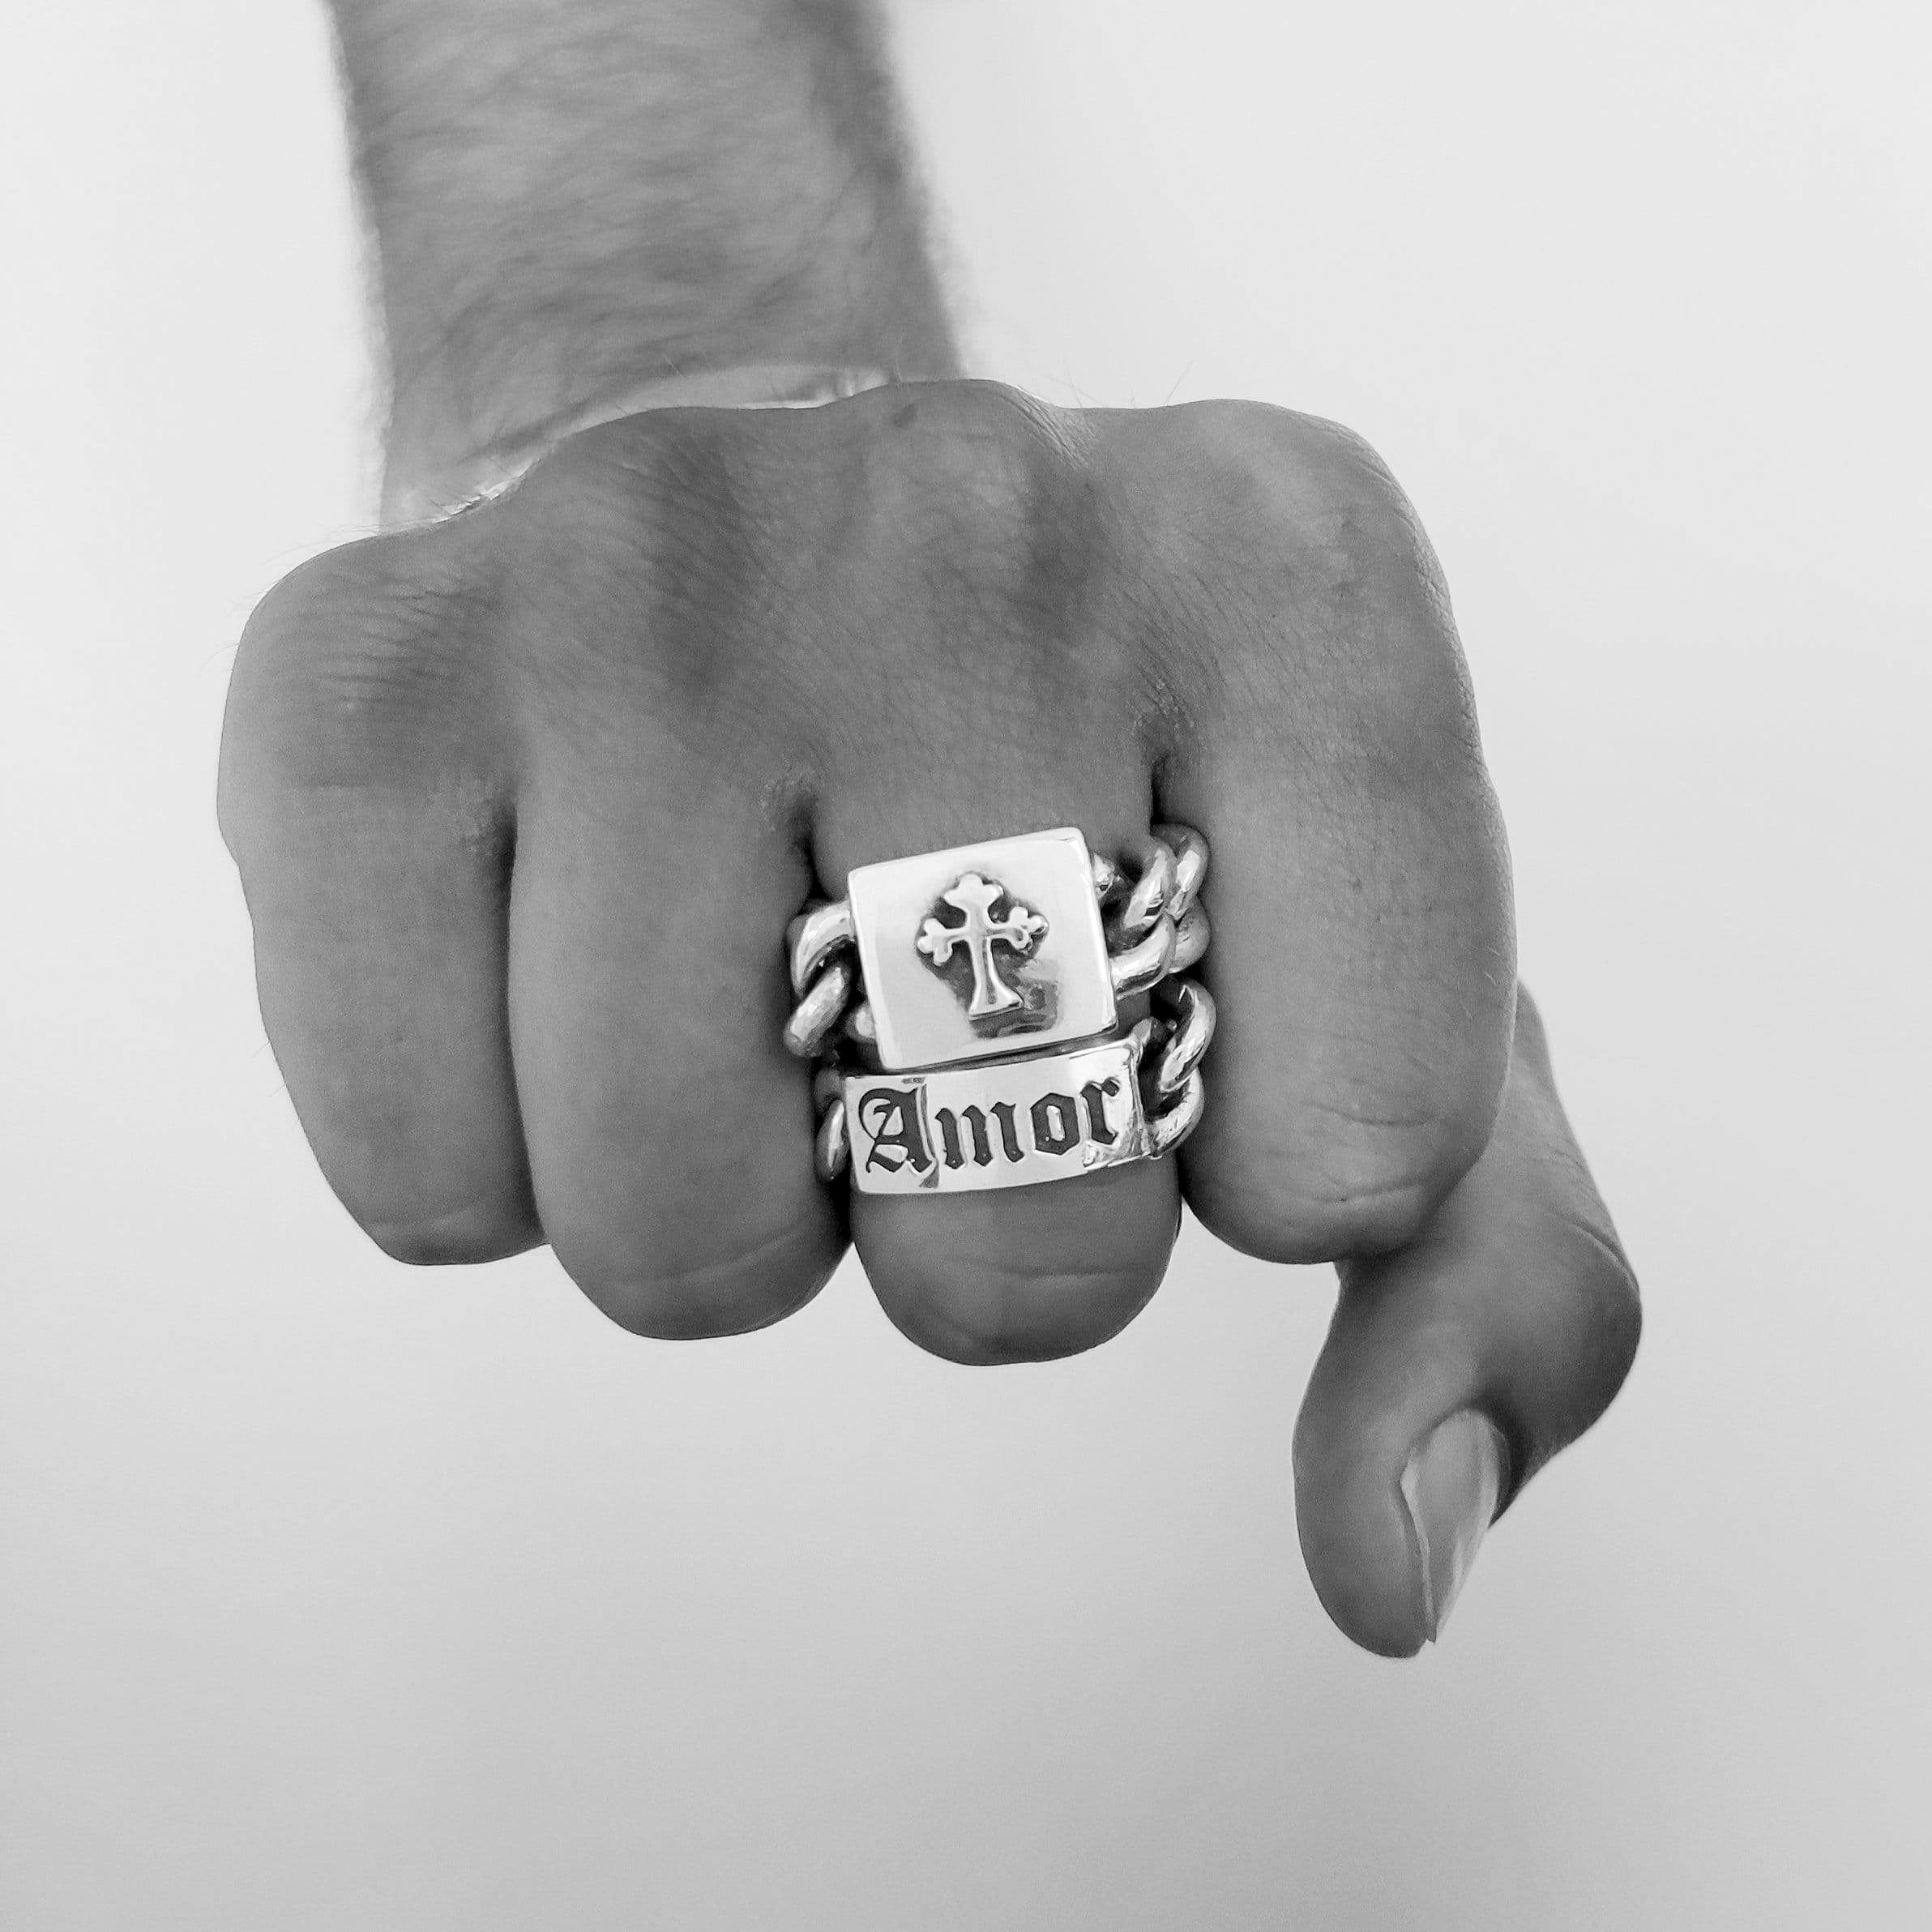 Solid Sterling Silver chain link ring, the head of the ring is a solid box with a cross design atop. On a male models hand